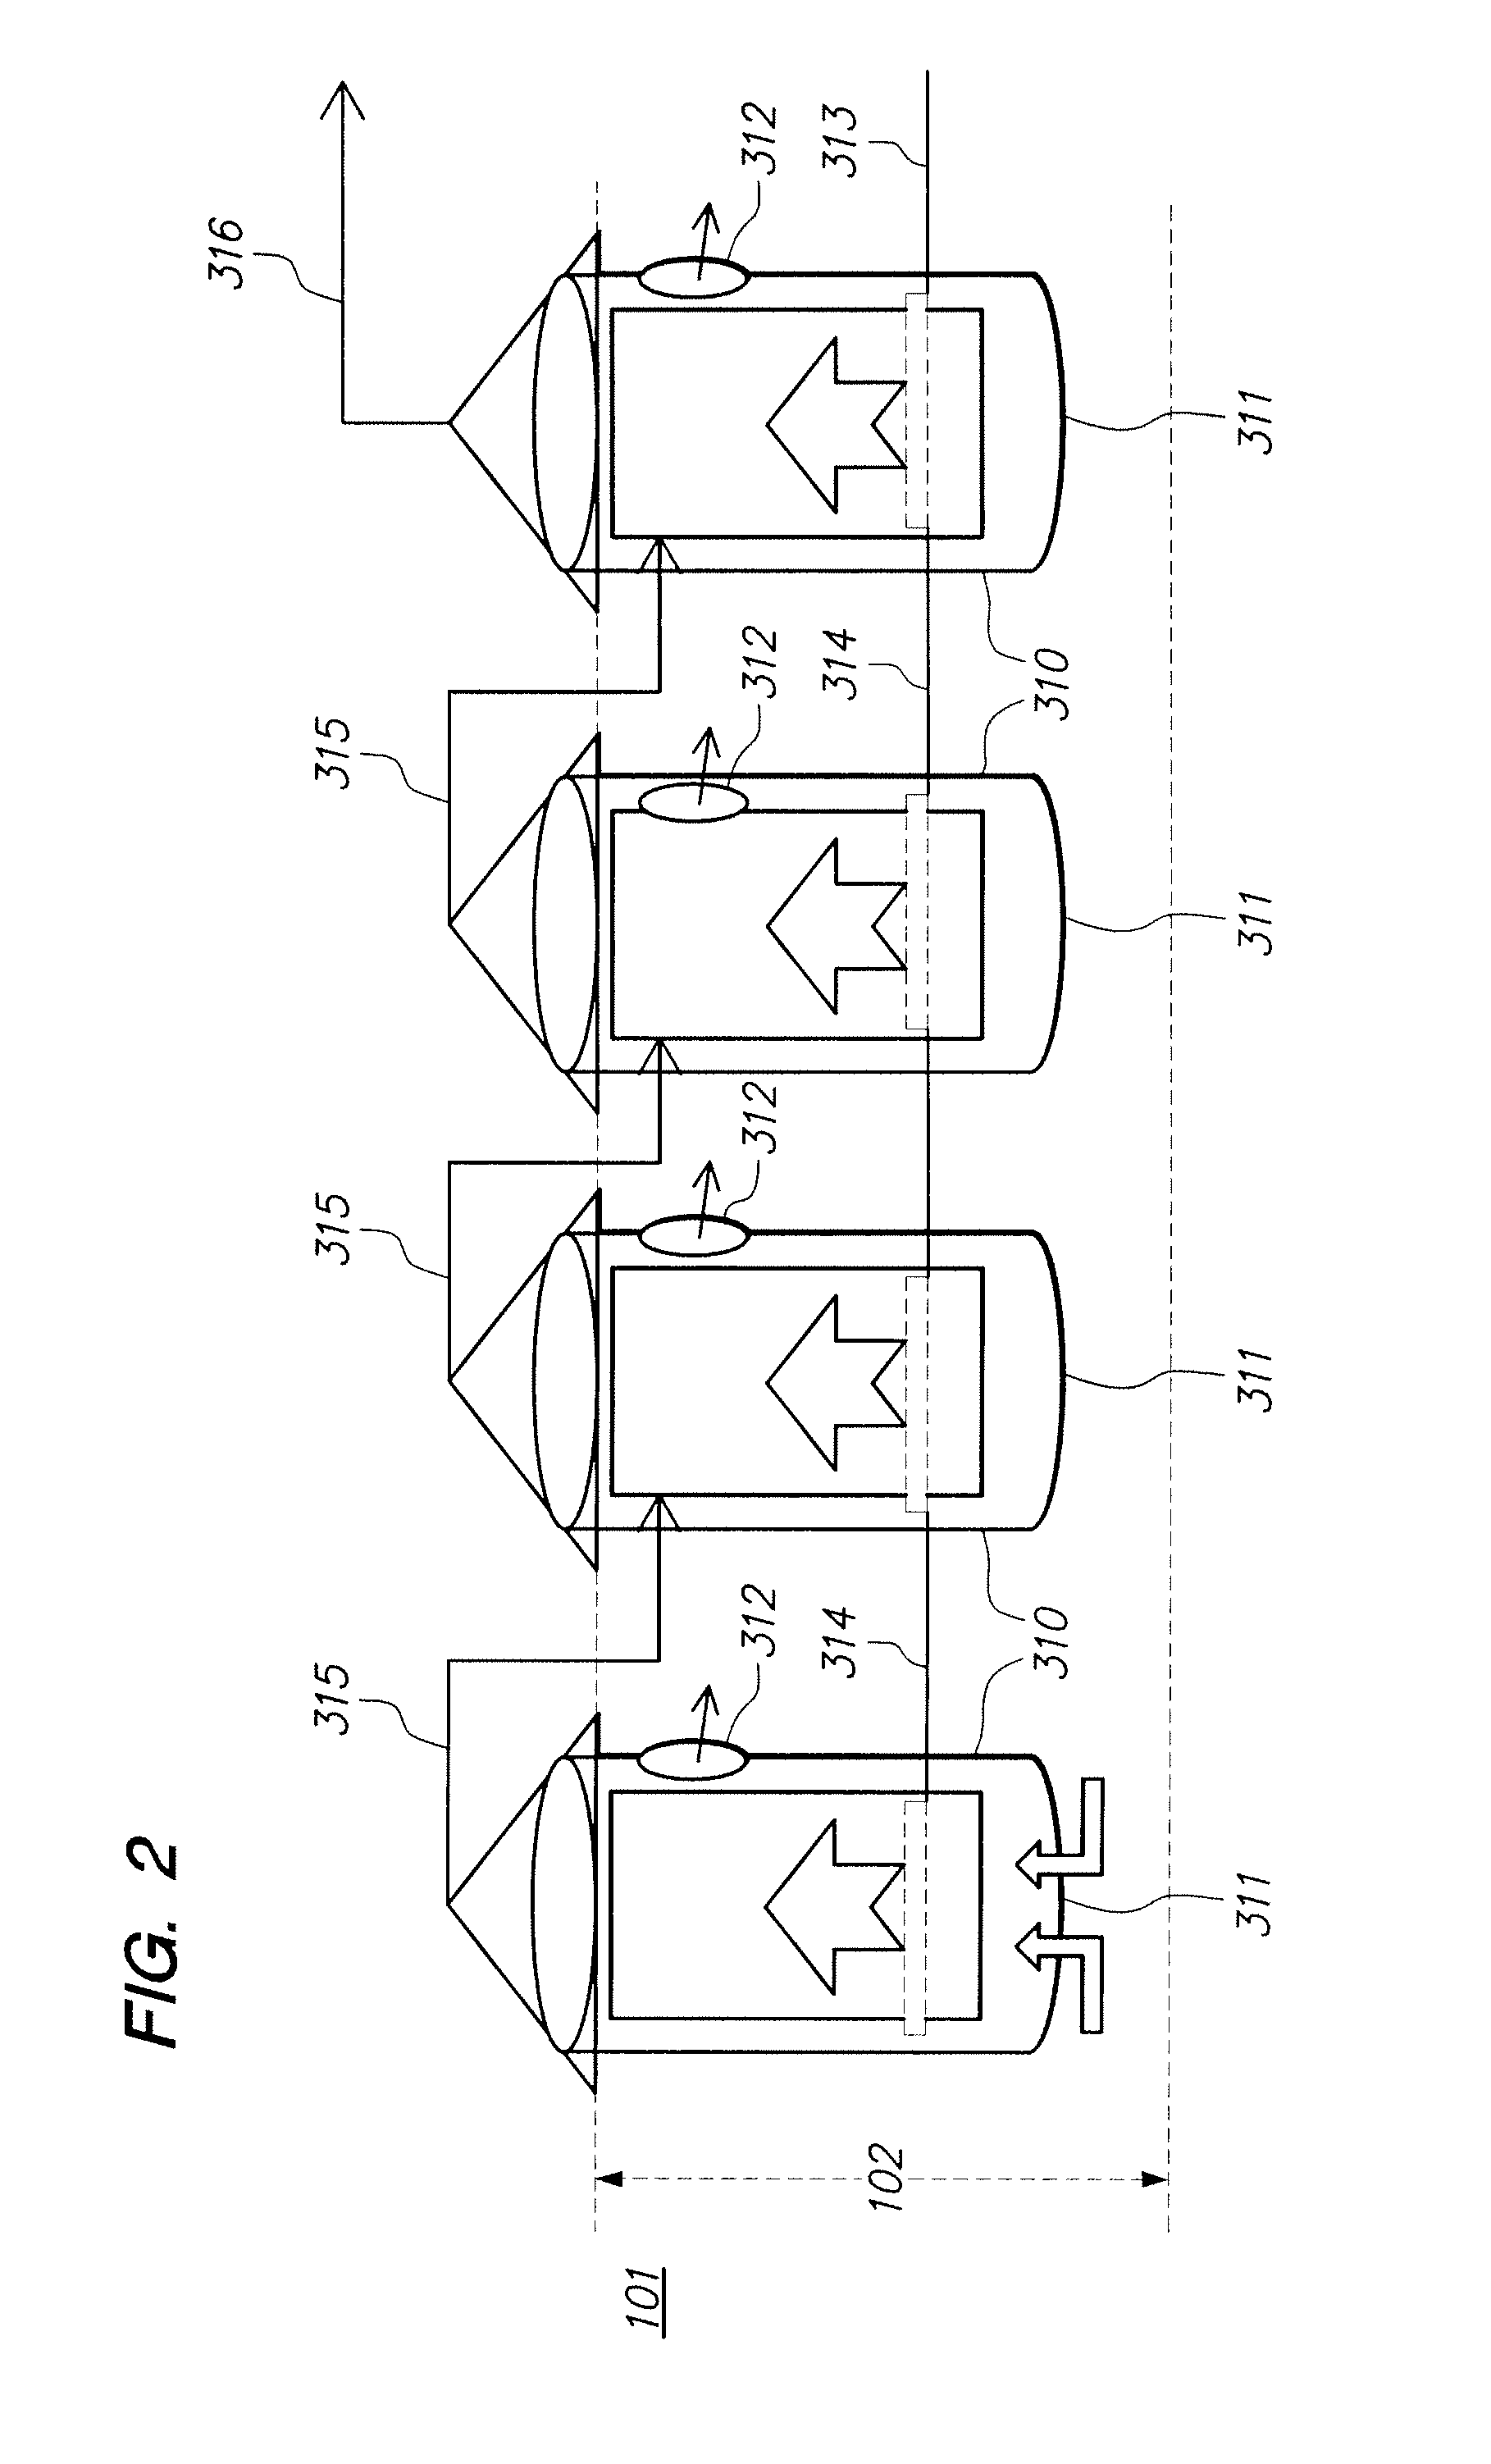 Systems and methods for producing biofuels from algae